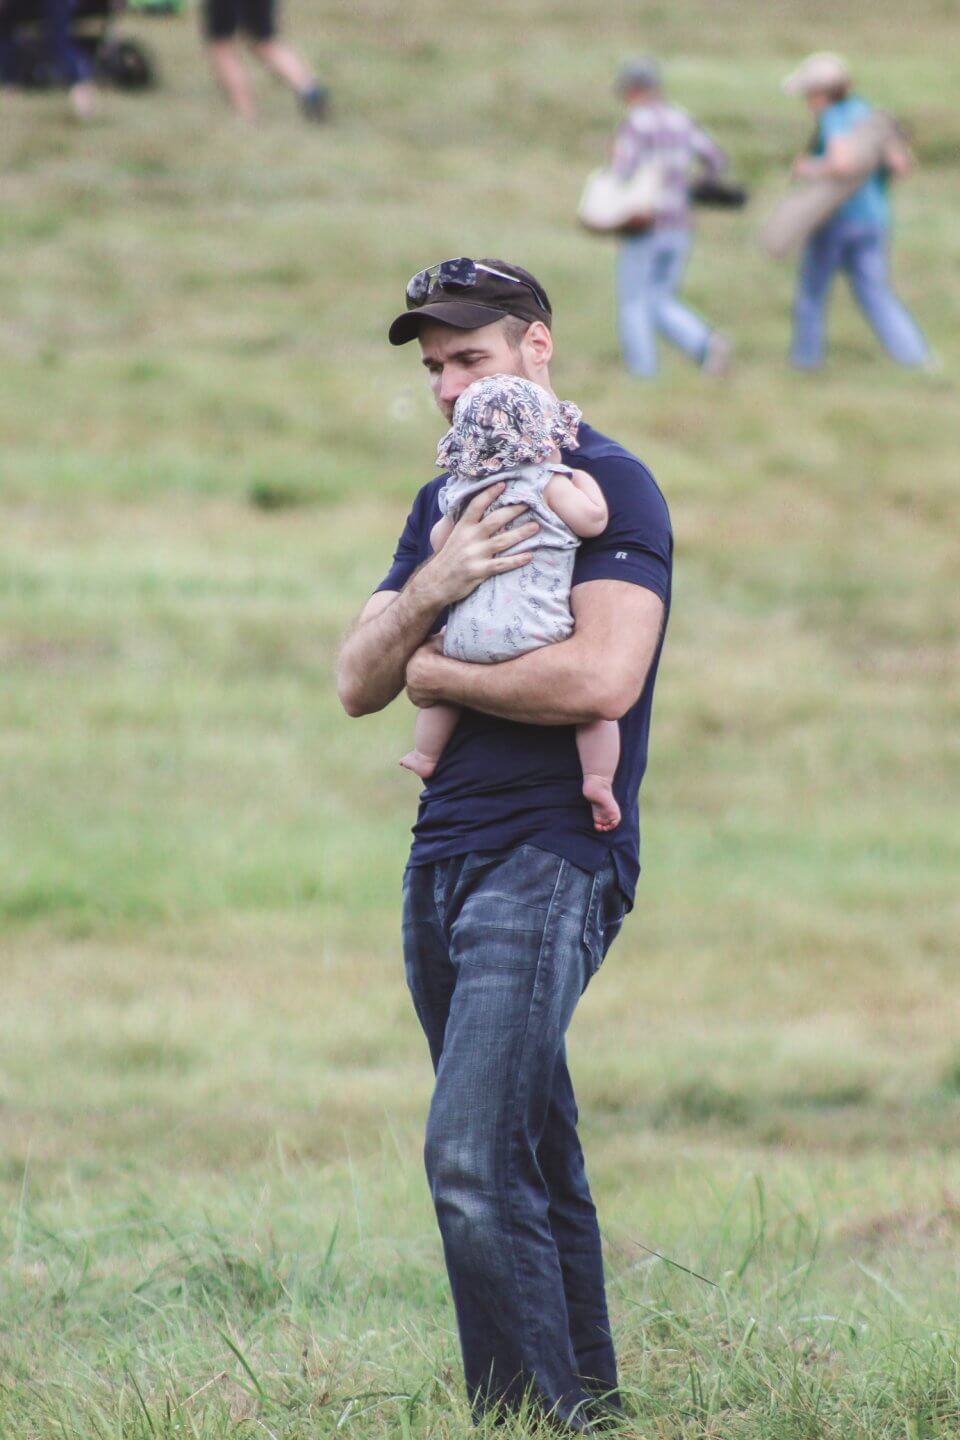 dad holding baby at outdoor sporting event